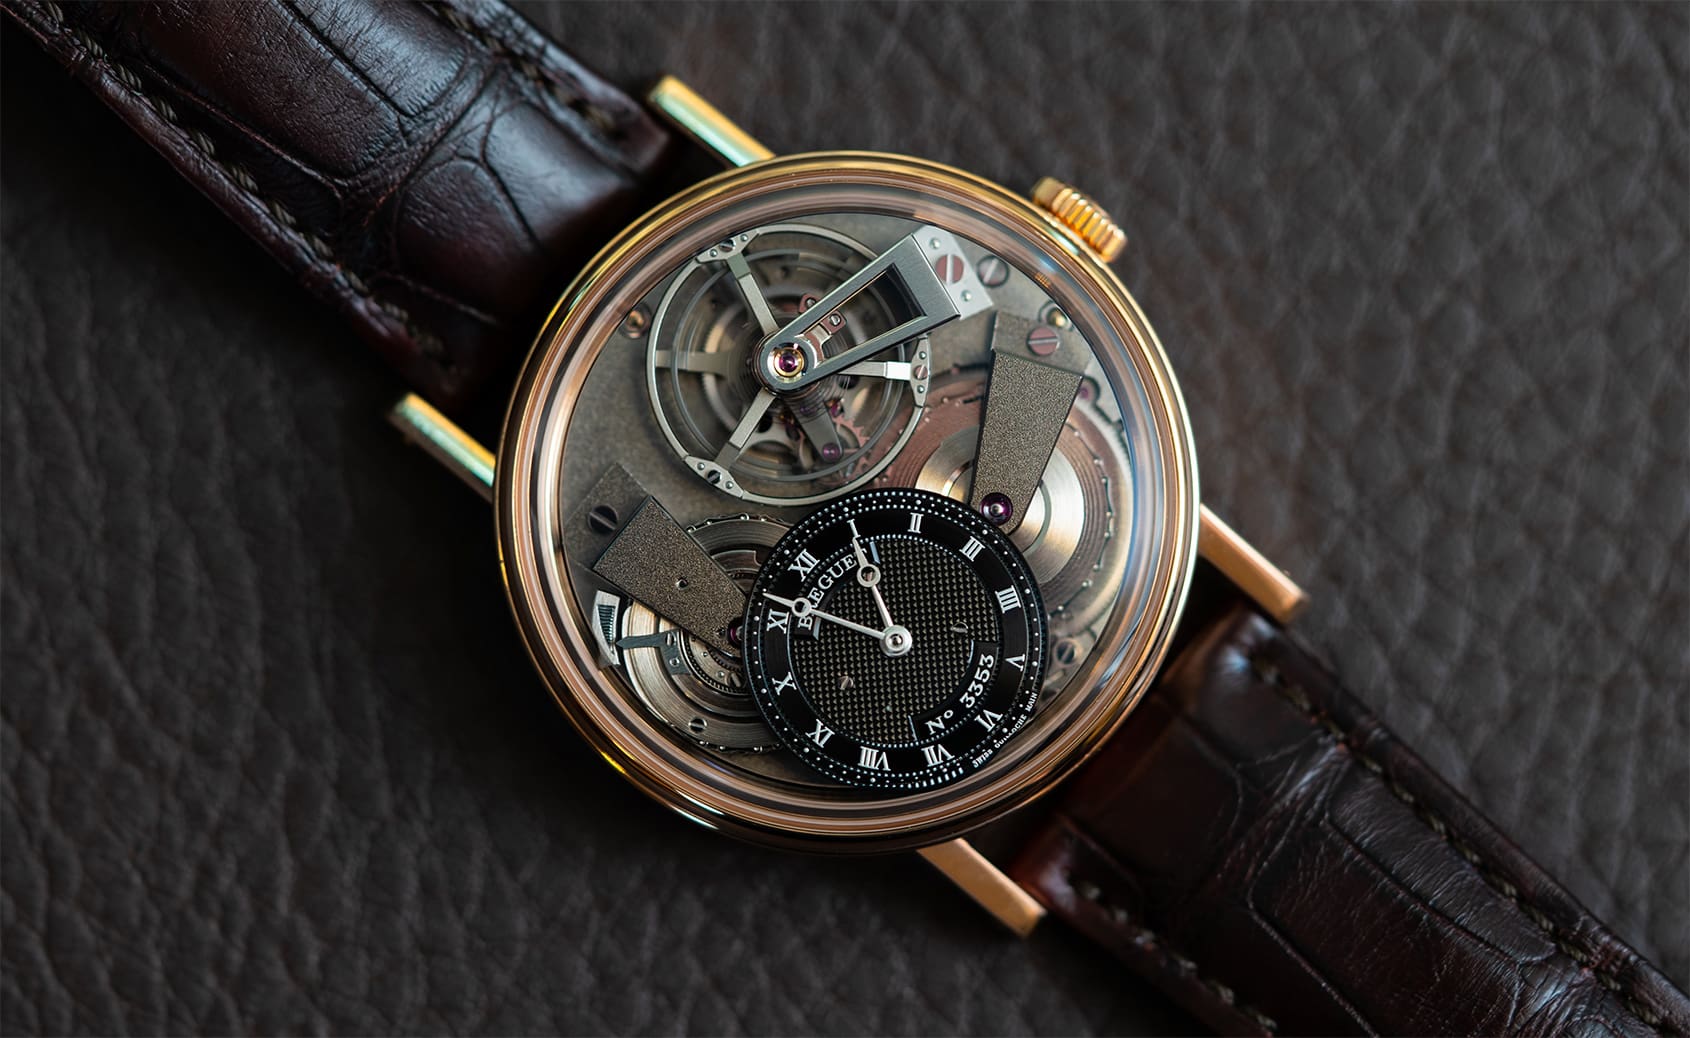 VIDEO: Never break the chain … Breguet’s Tradition 7047 is a masterpiece of fine watchmaking 